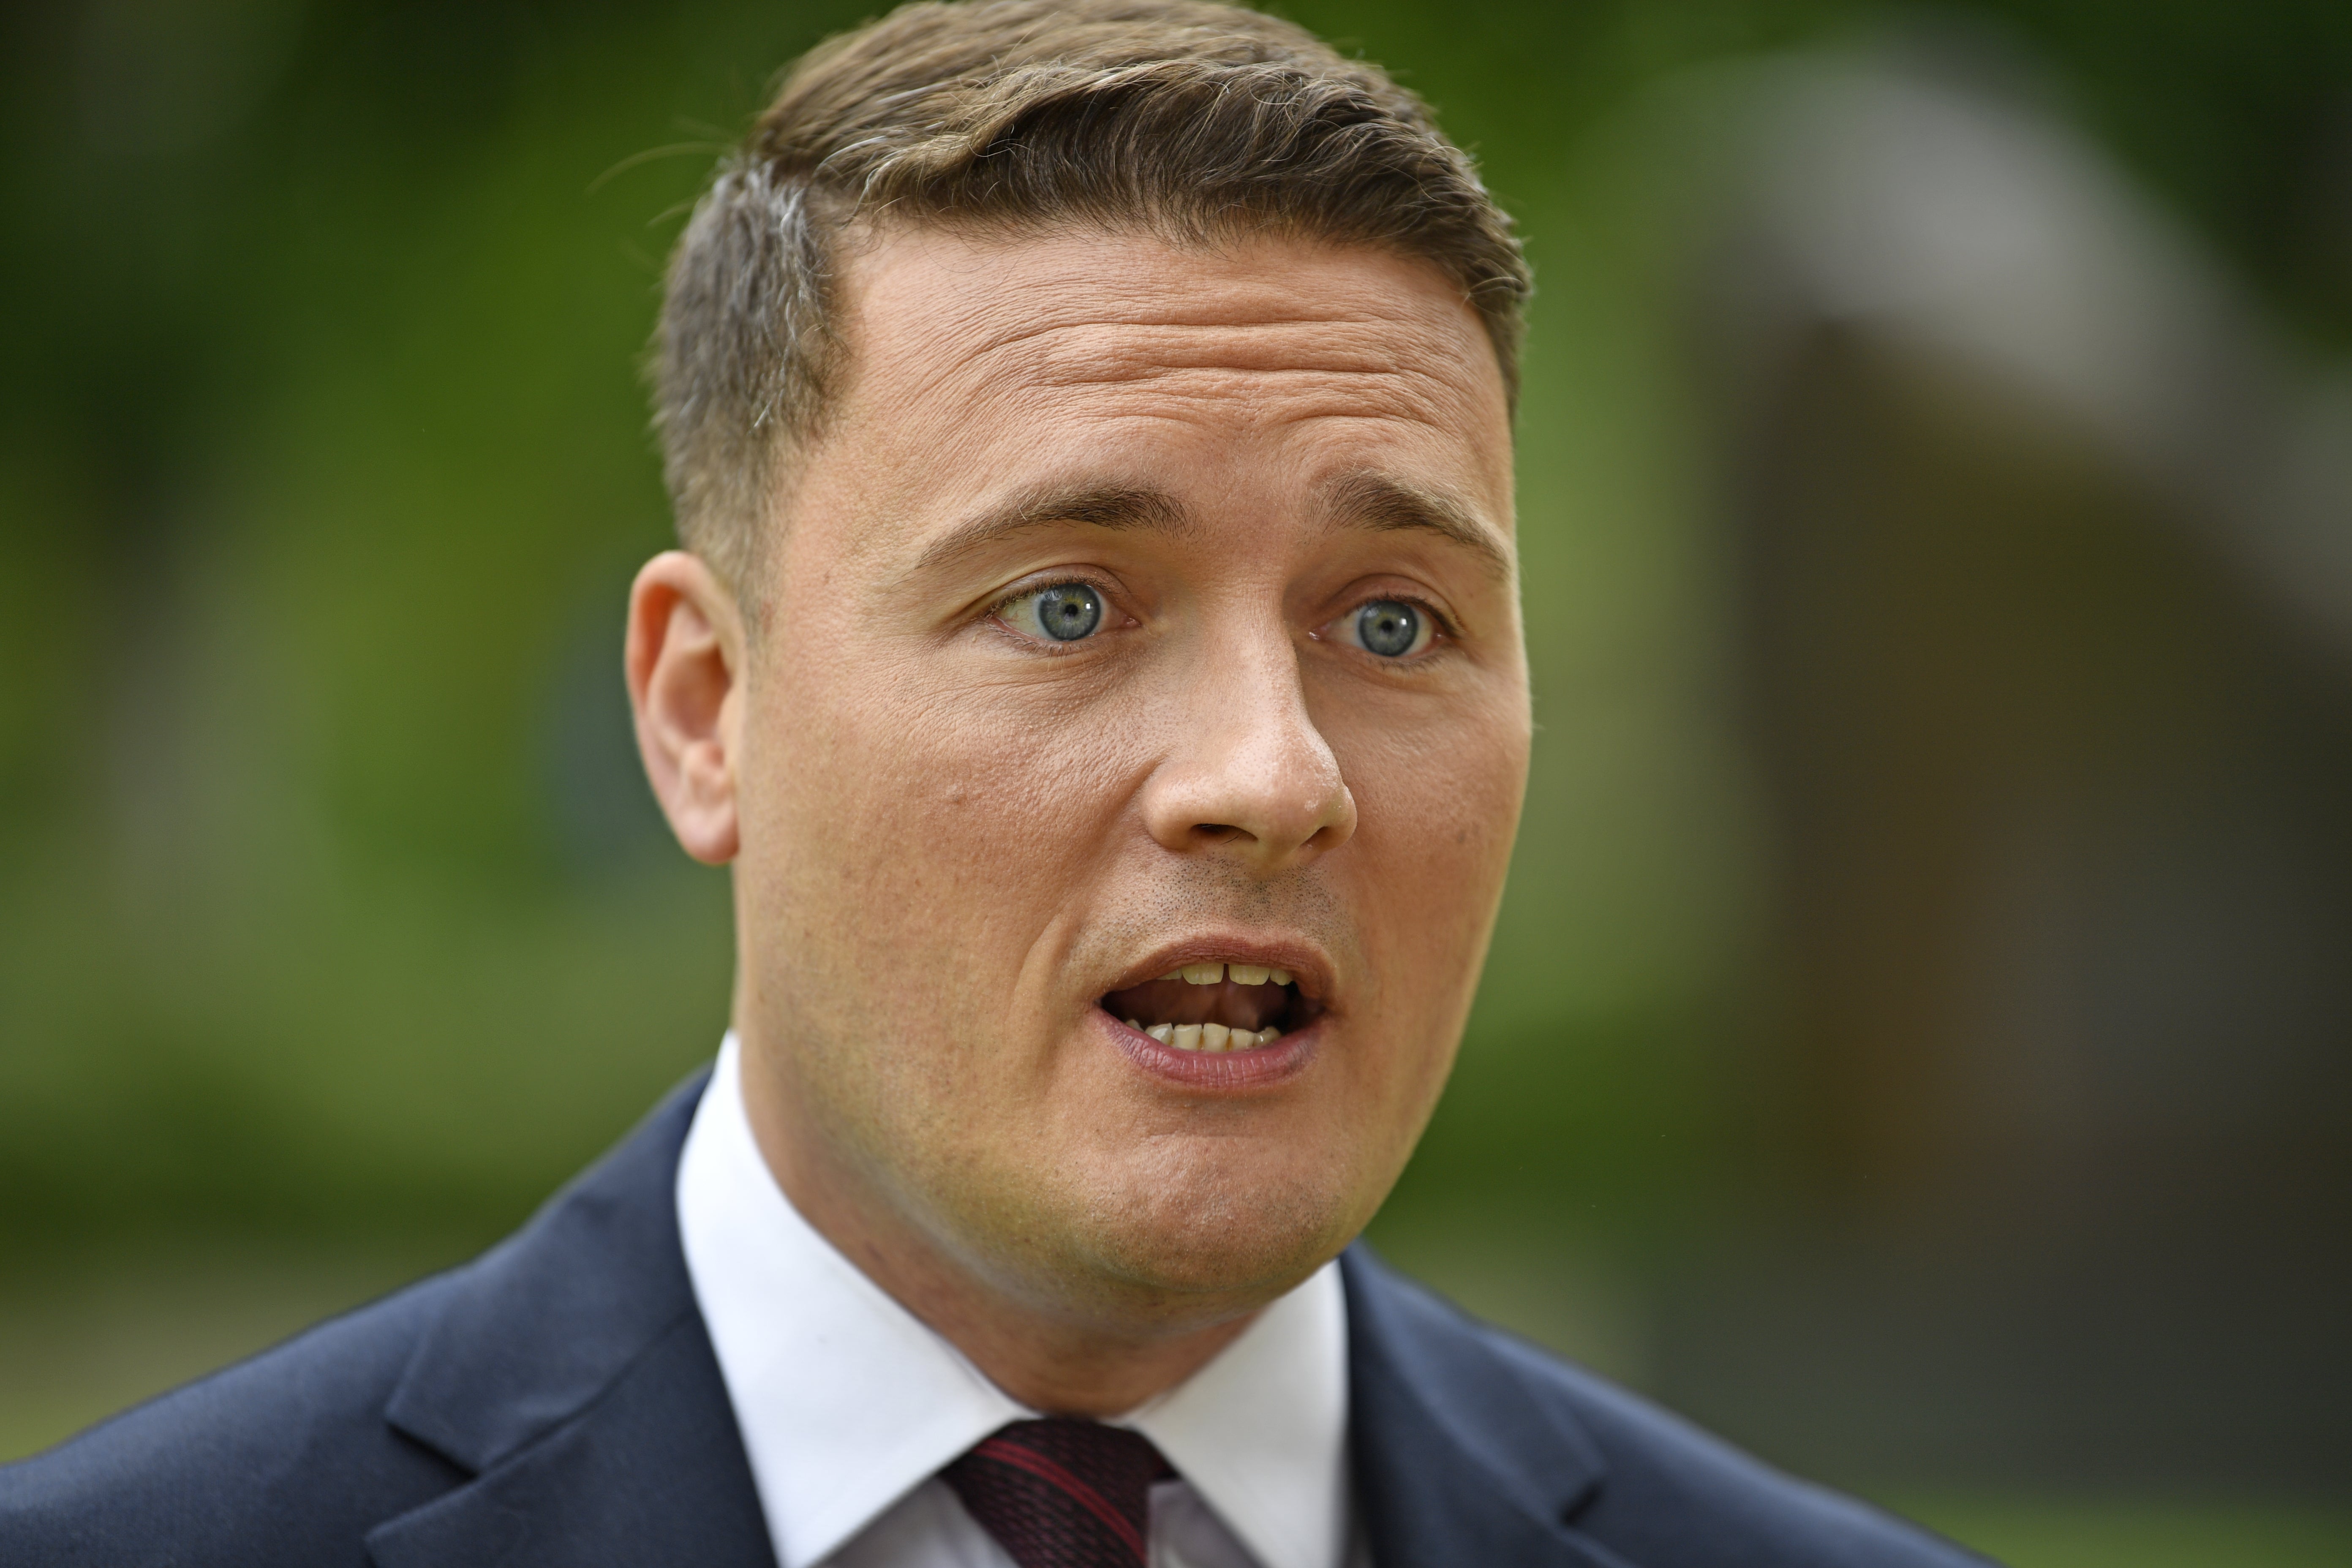 Wes Streeting said the Conservatives will try to lose the next general election (Beresford Hodge/PA)